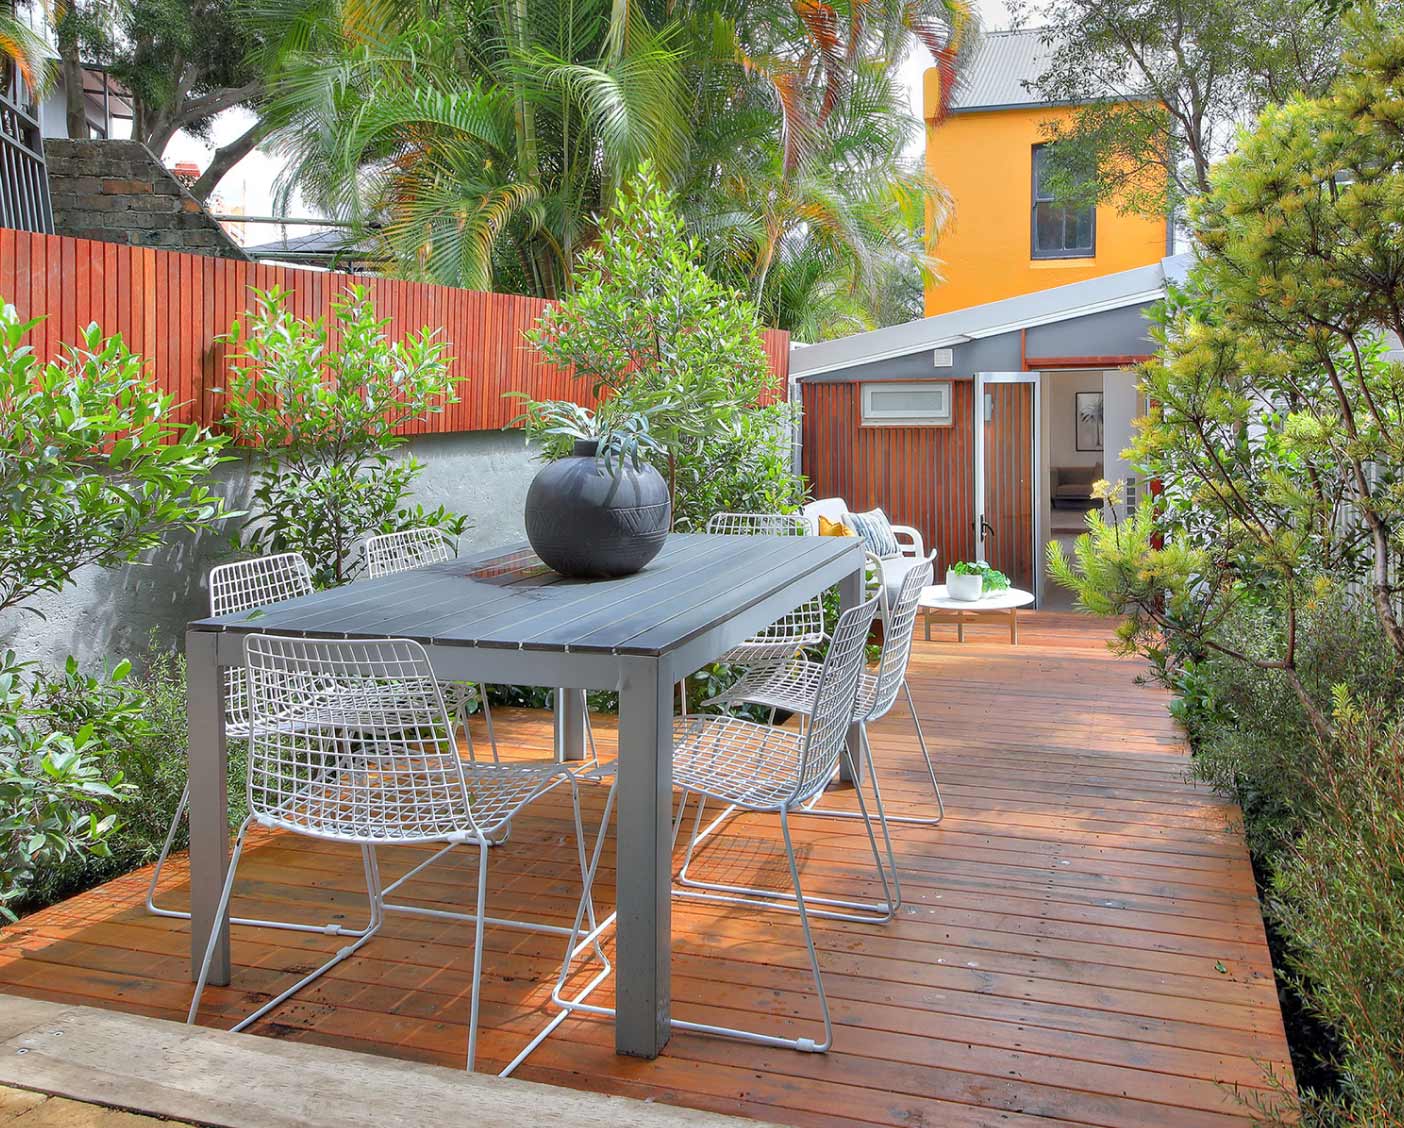 1404x1128-the-bray-8-rear-courtyard-with-oiled-deck-and-low-maintenance-garden